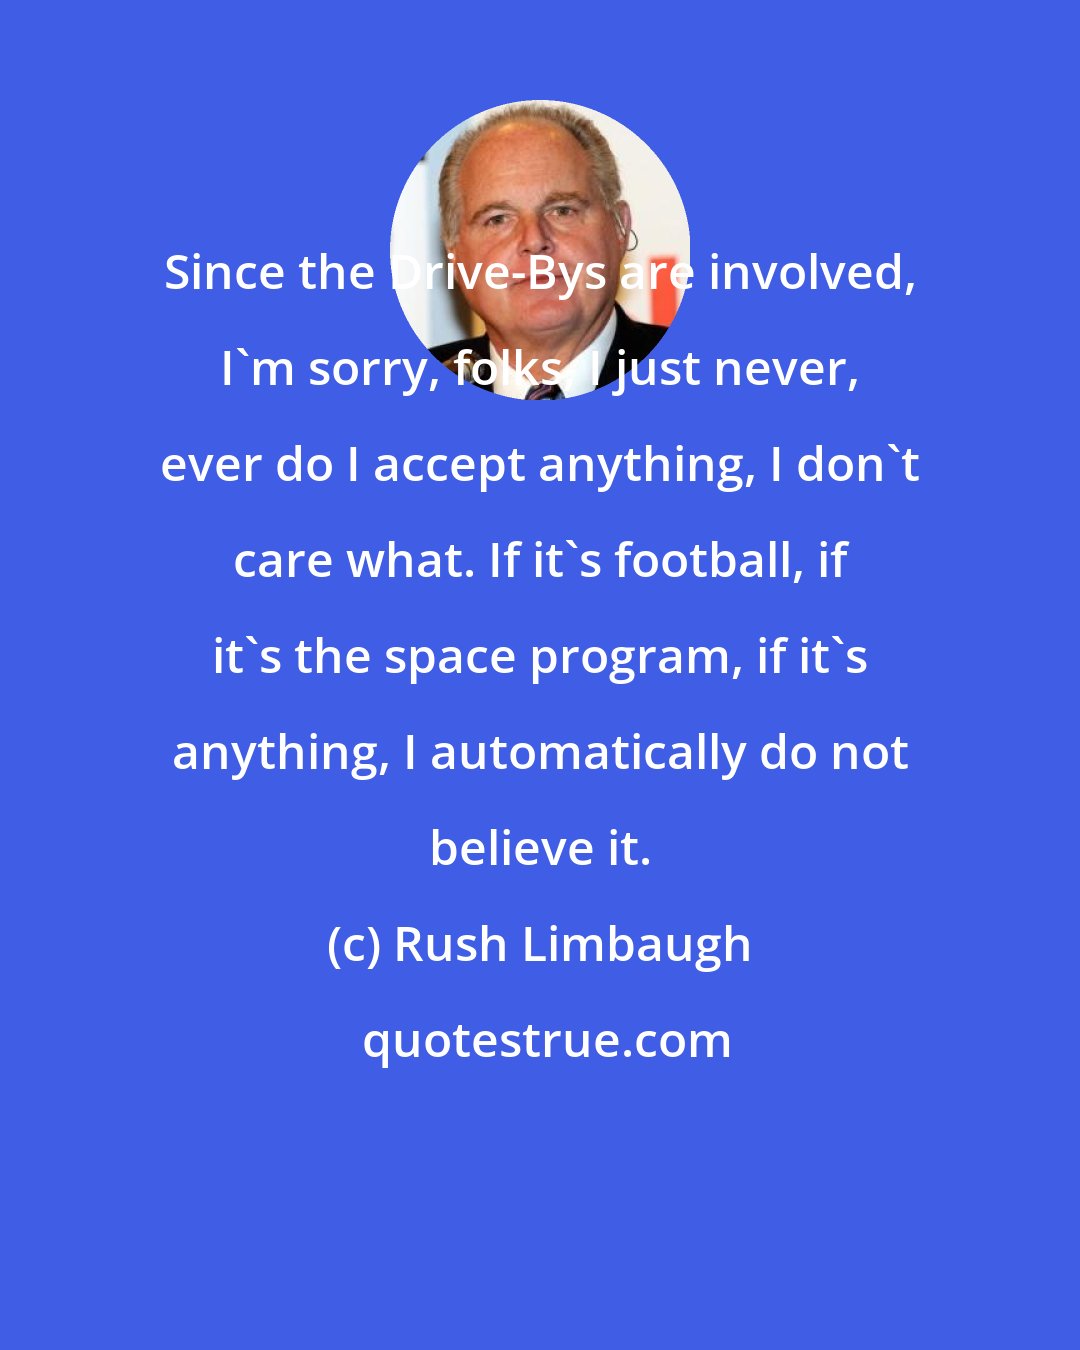 Rush Limbaugh: Since the Drive-Bys are involved, I'm sorry, folks, I just never, ever do I accept anything, I don't care what. If it's football, if it's the space program, if it's anything, I automatically do not believe it.